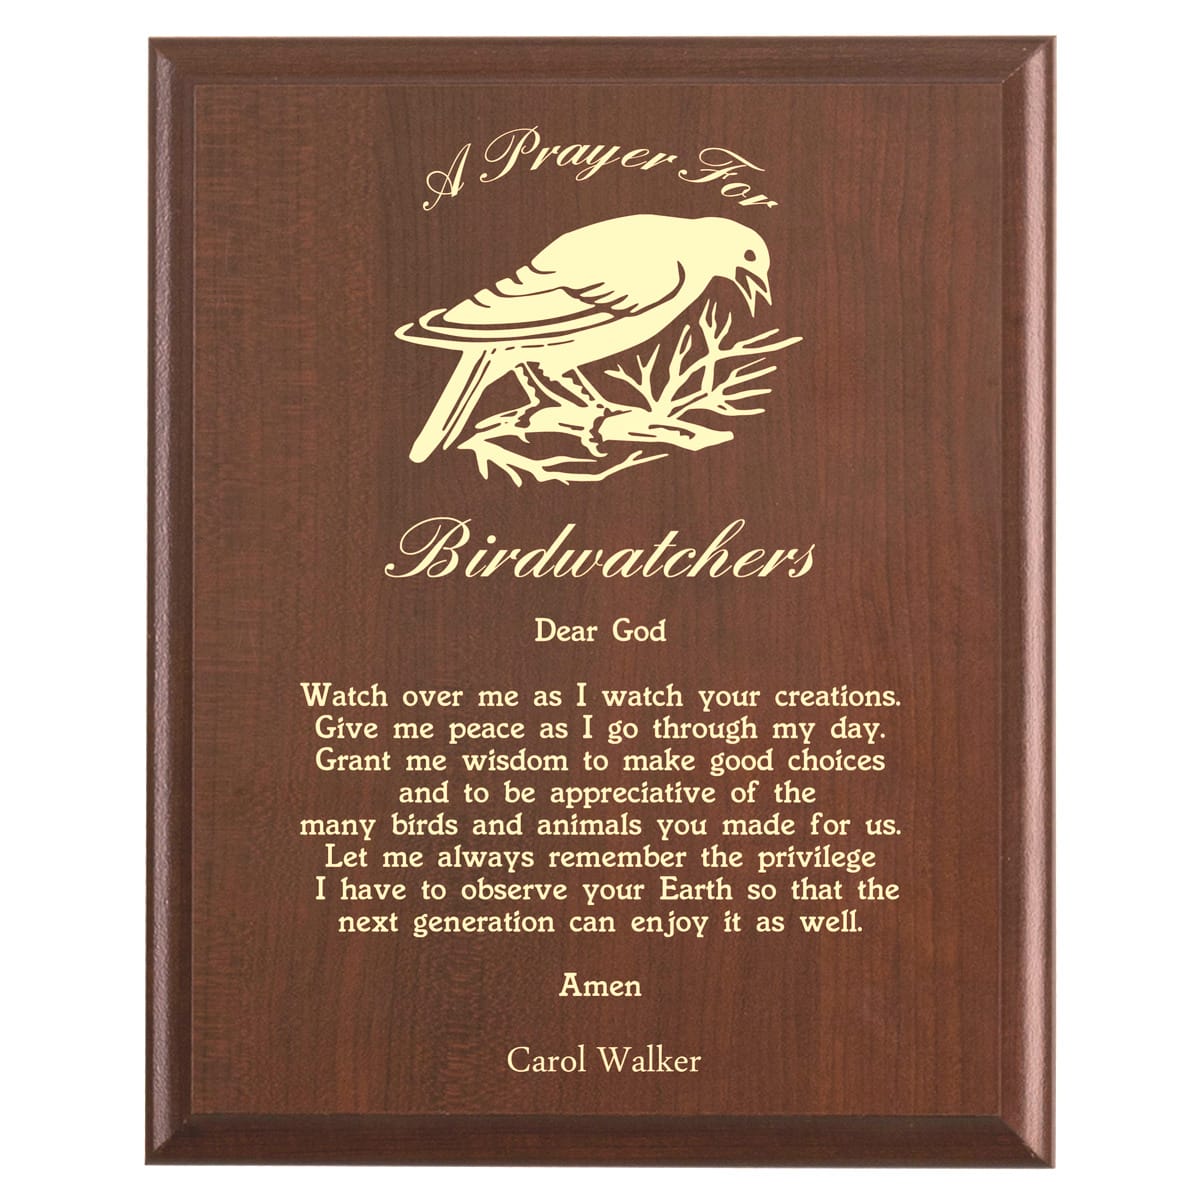 Plaque photo: Birdwatching Prayer Plaque design with free personalization. Wood style finish with customized text.